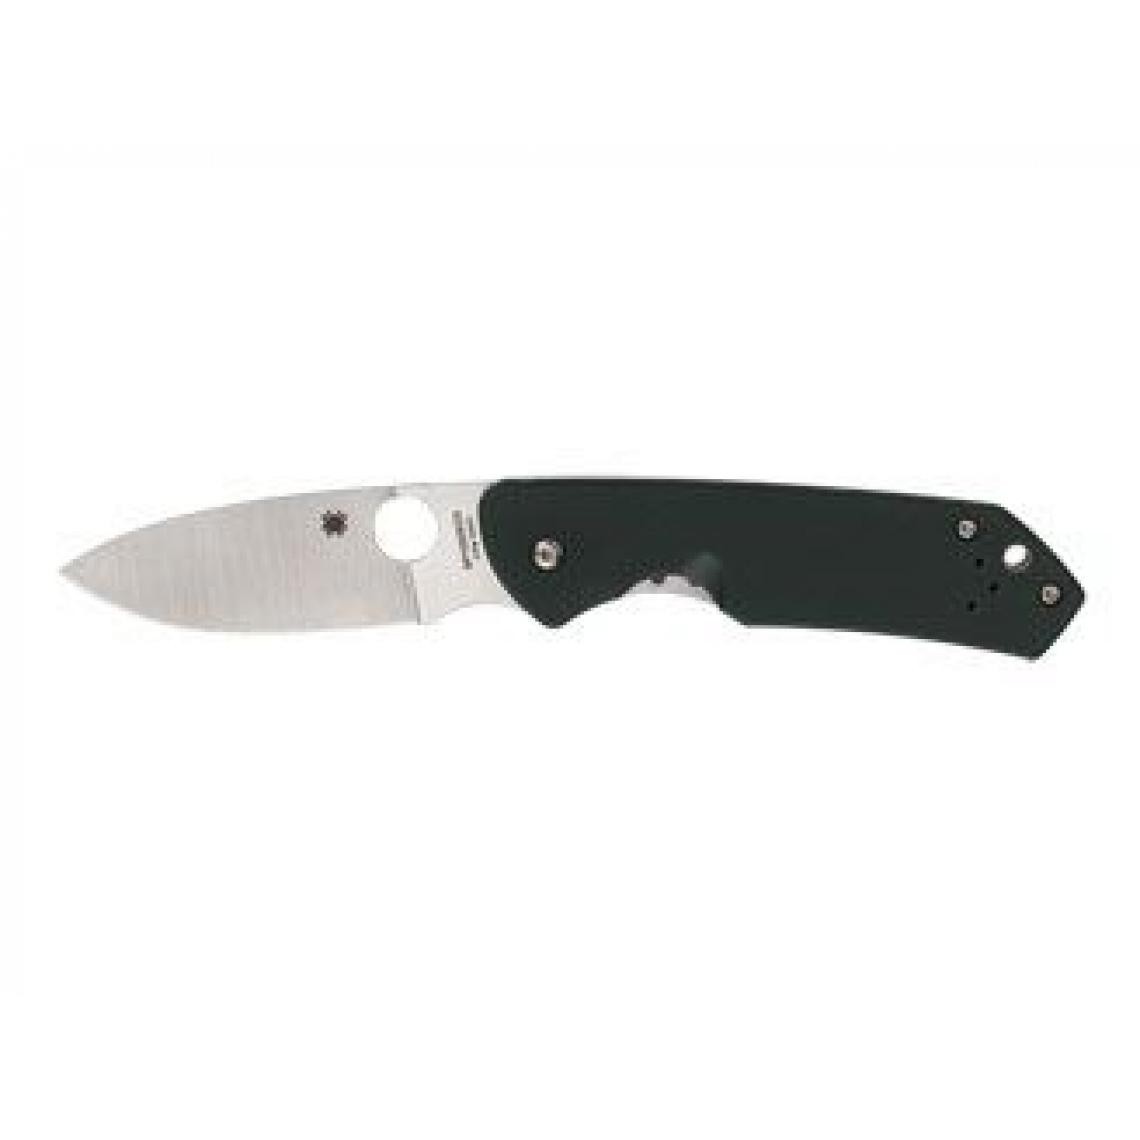 Divers Marques - Spyderco BROUWER TI/G-10 C232GTIP - Outils de coupe